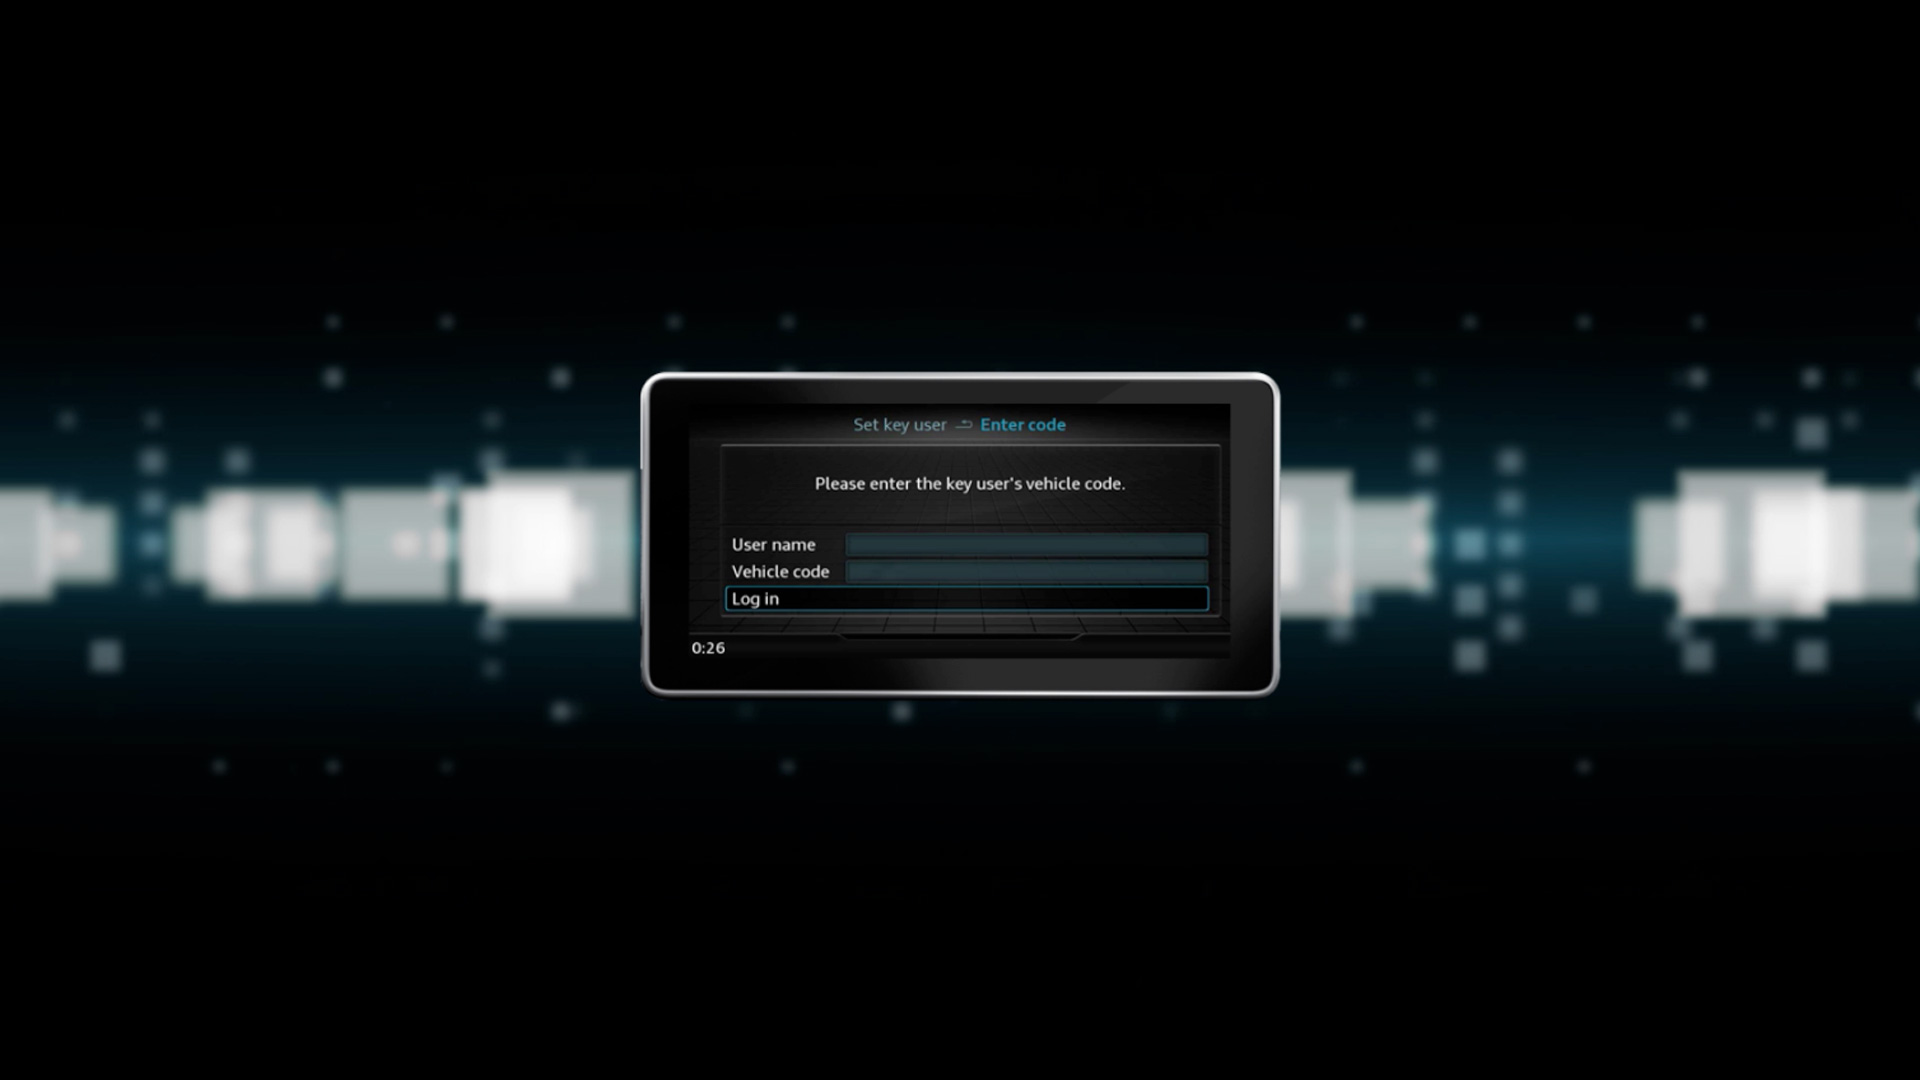 A screenshot from the video tutorial that describes how to set up a Key User in an Audi. 